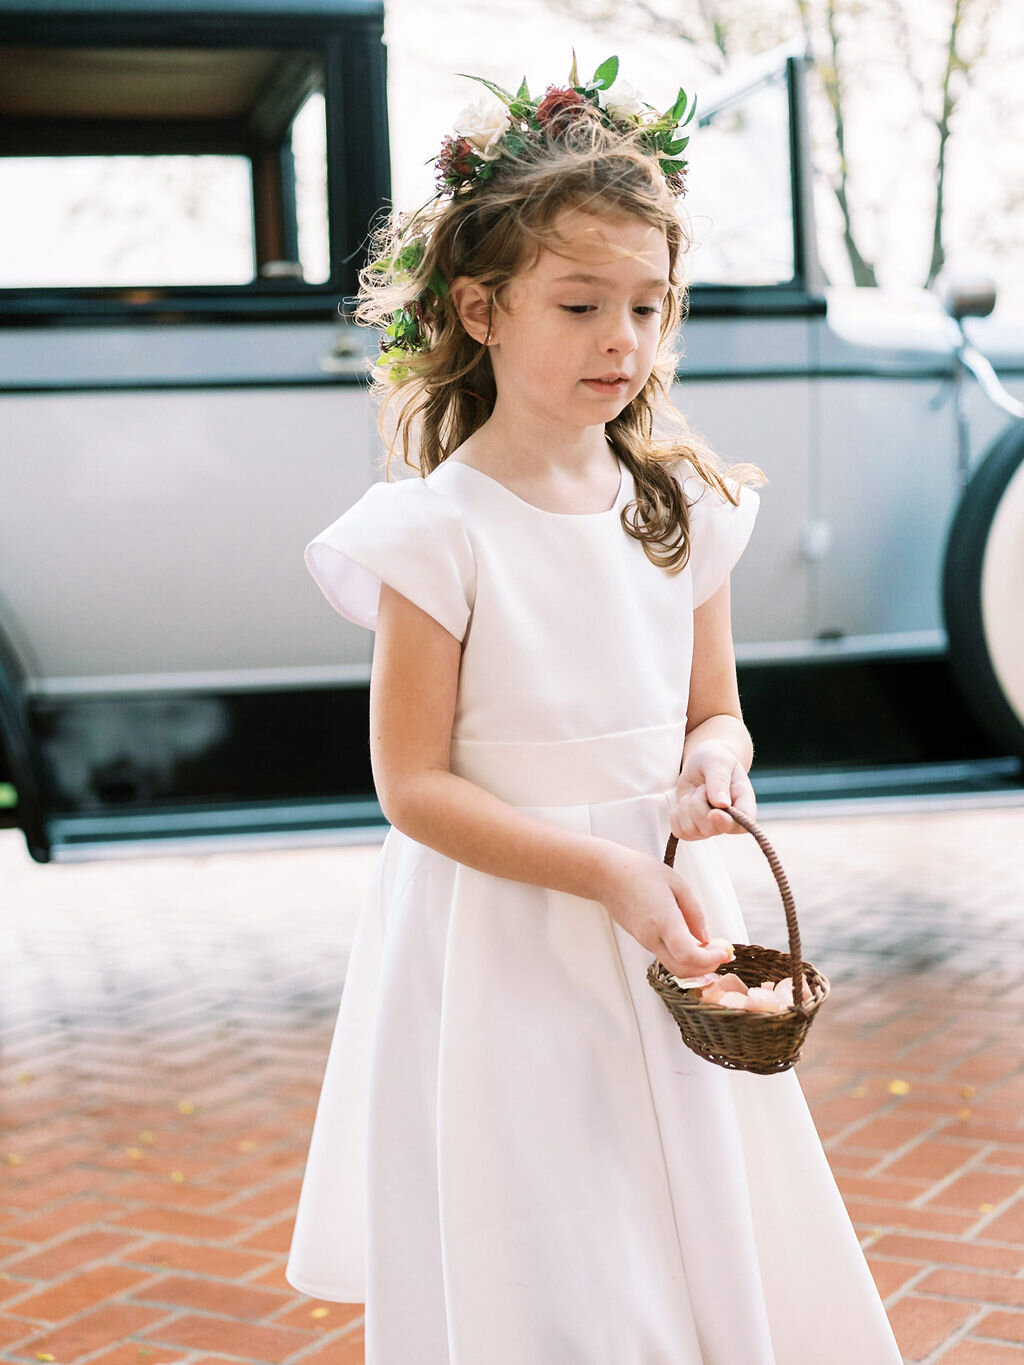 Dainty flower girl crowns with muted fall color palette and dusty blush rose petals. Vintage car for the bride. Nashville wedding floral designer, Mary Love Richardson of Rosemary & Finch.